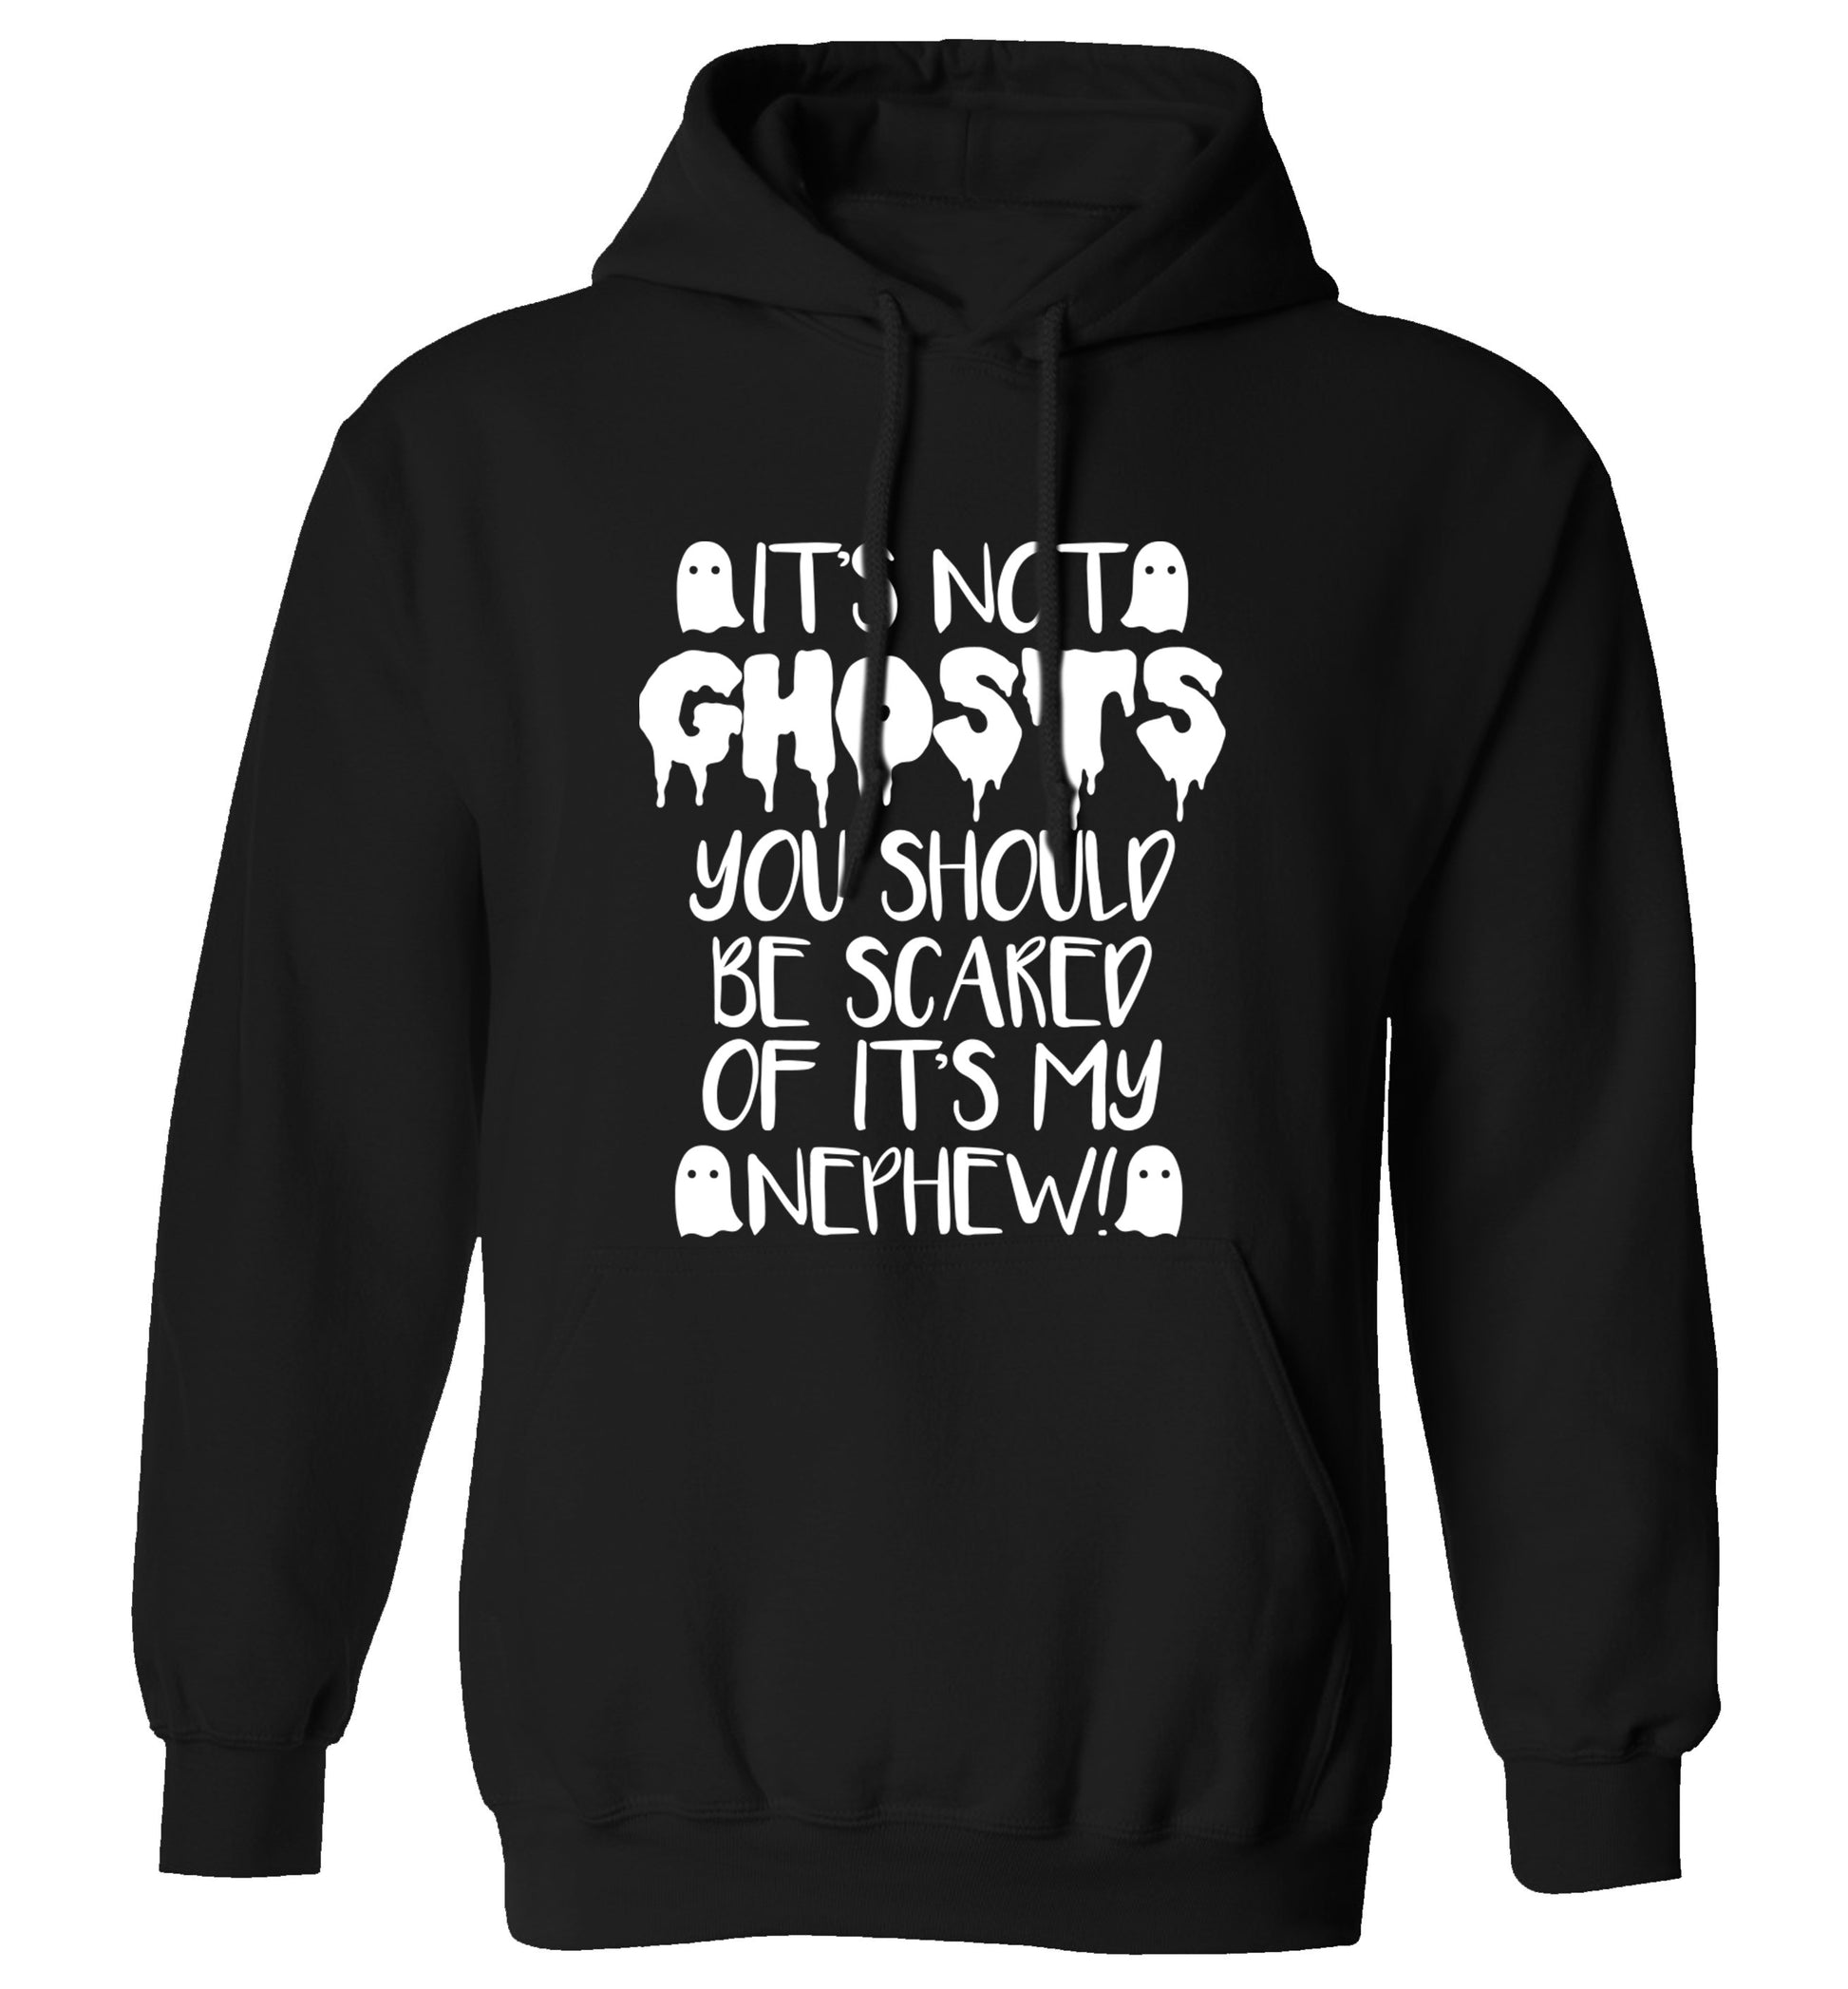 It's not ghosts you should be scared of it's my nephew! adults unisex black hoodie 2XL